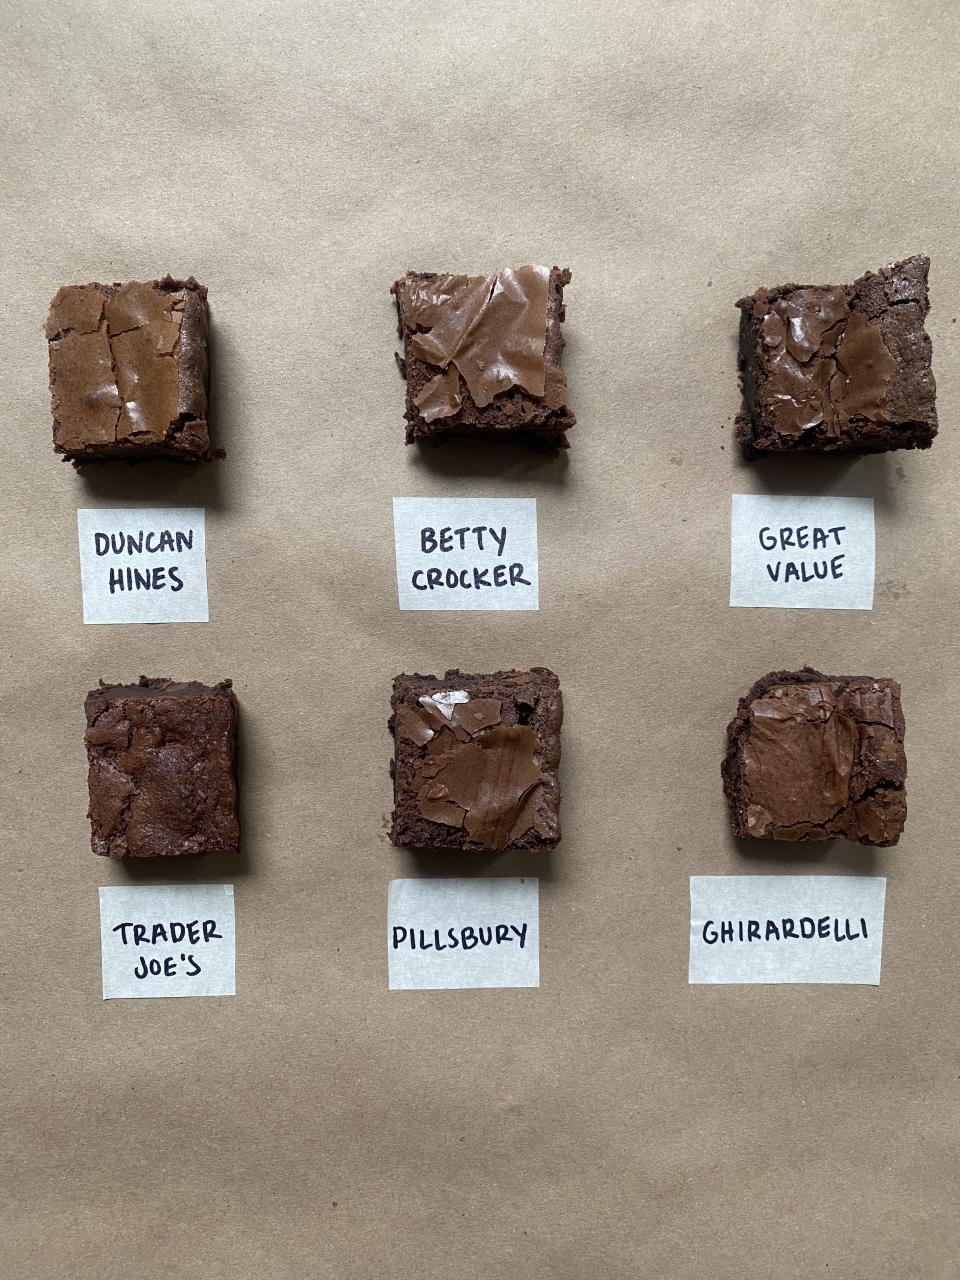 Six brownies labeled with brand names Duncan Hines, Betty Crocker, Great Value, Trader Joe's, Pillsbury, and Ghirardelli for comparison